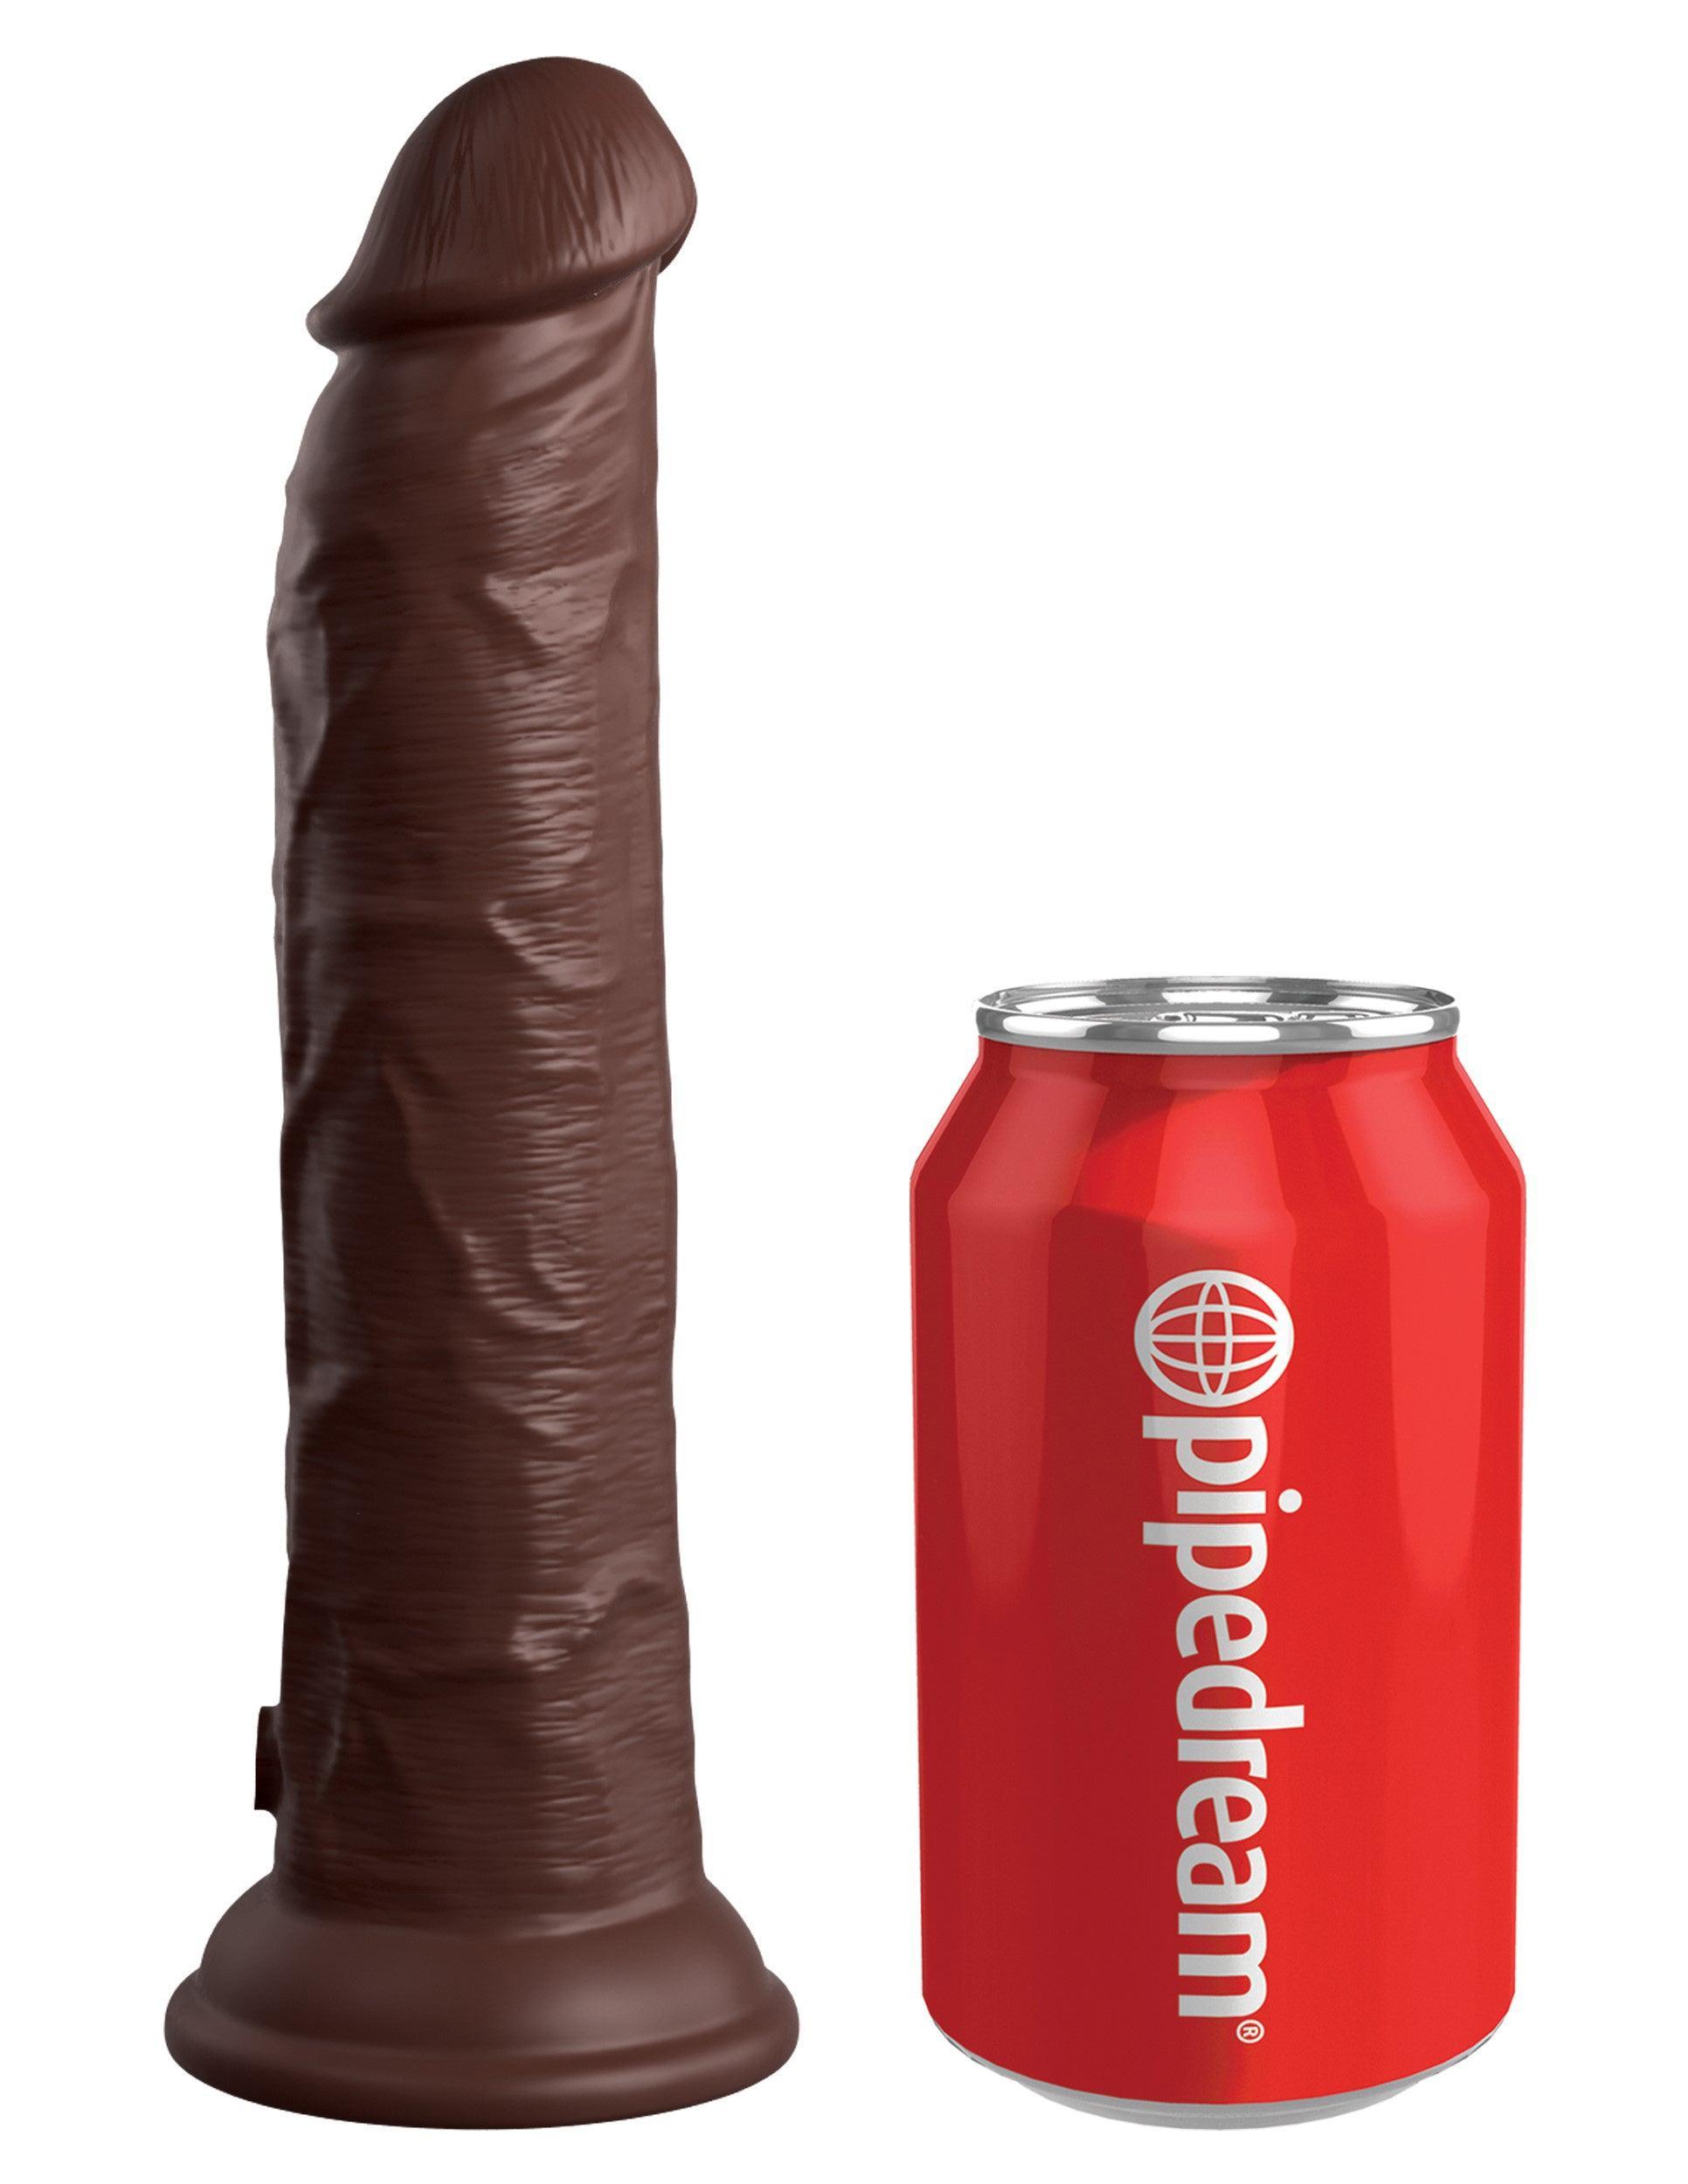 King Cock Elite 9 Inch Vibrating Silicone Dual Density Cock With Remote - Brown - My Sex Toy Hub